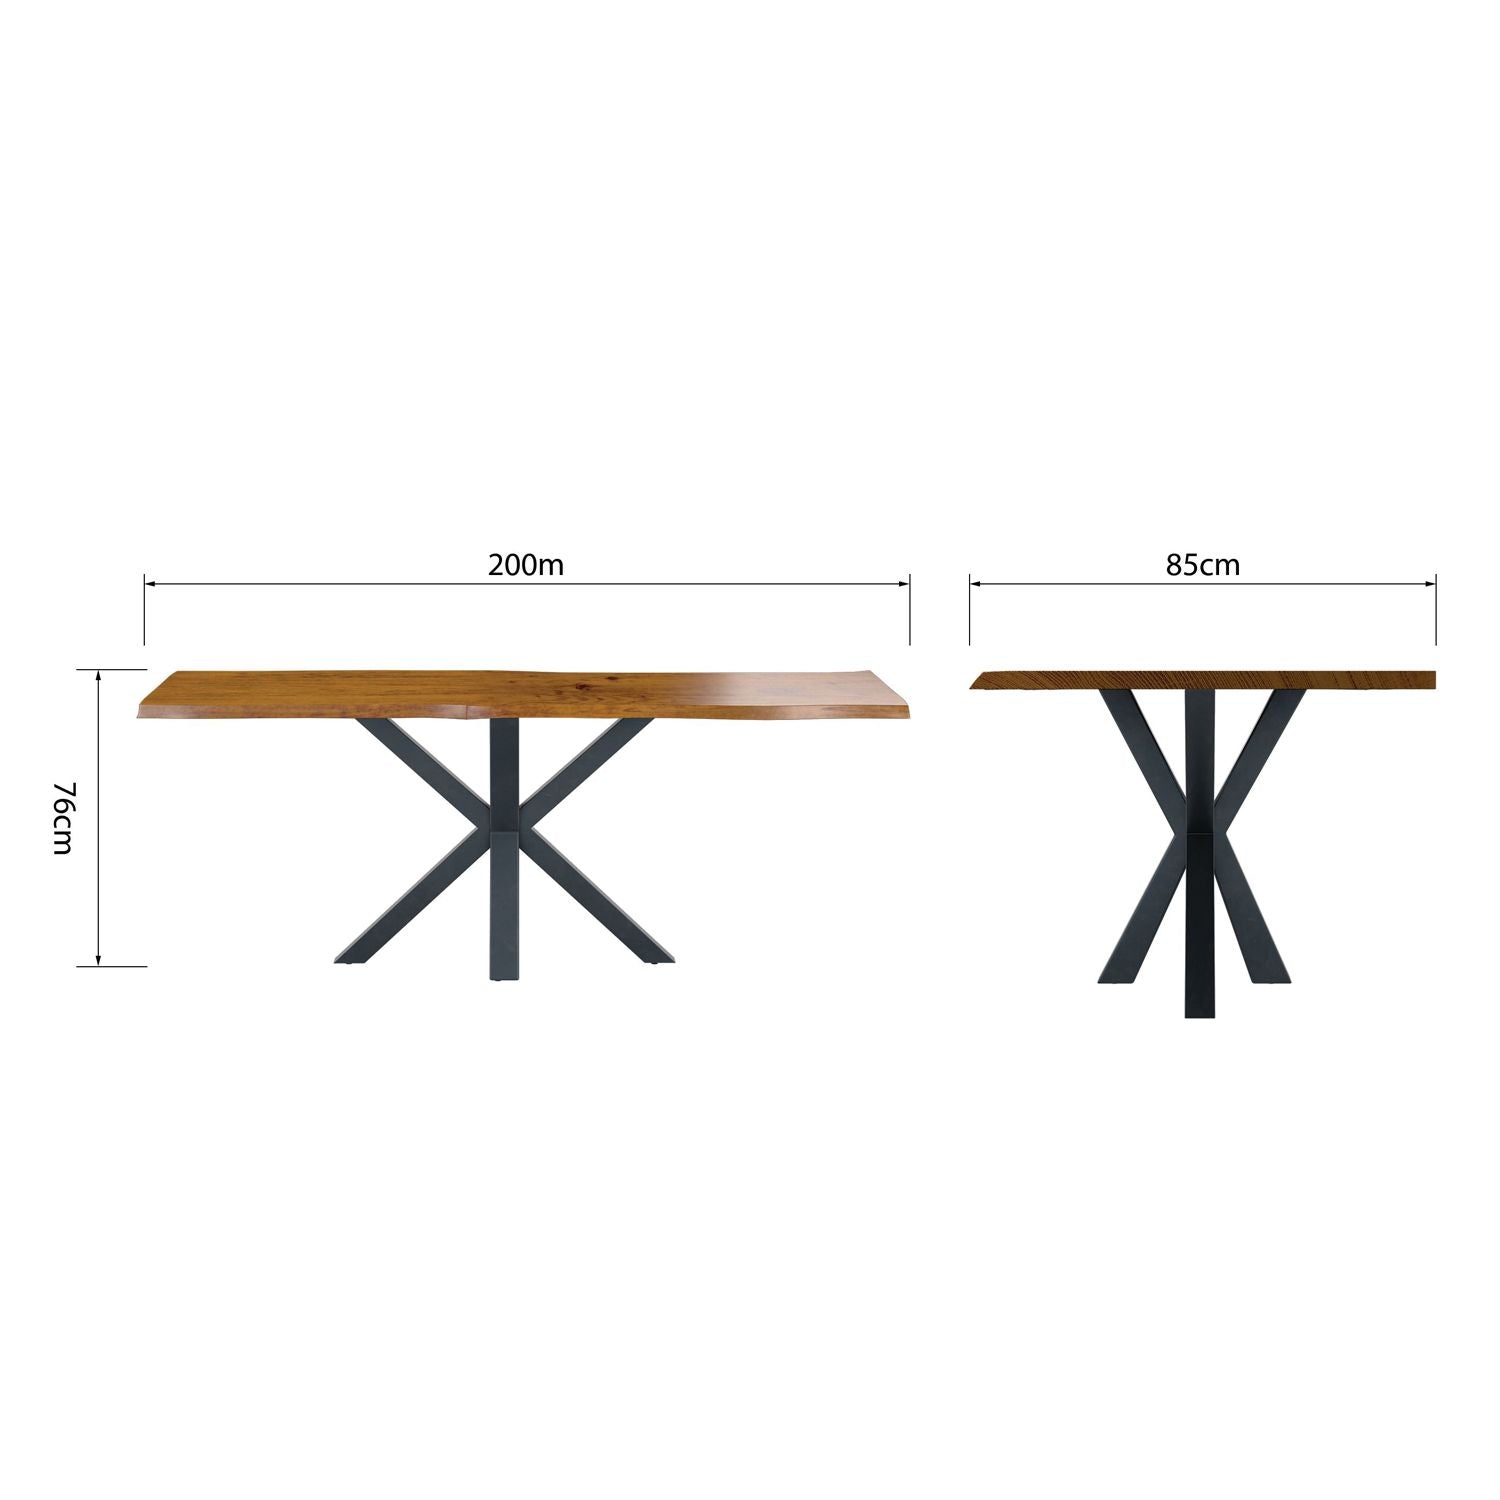 Measurements Of The Dining Table - 2m